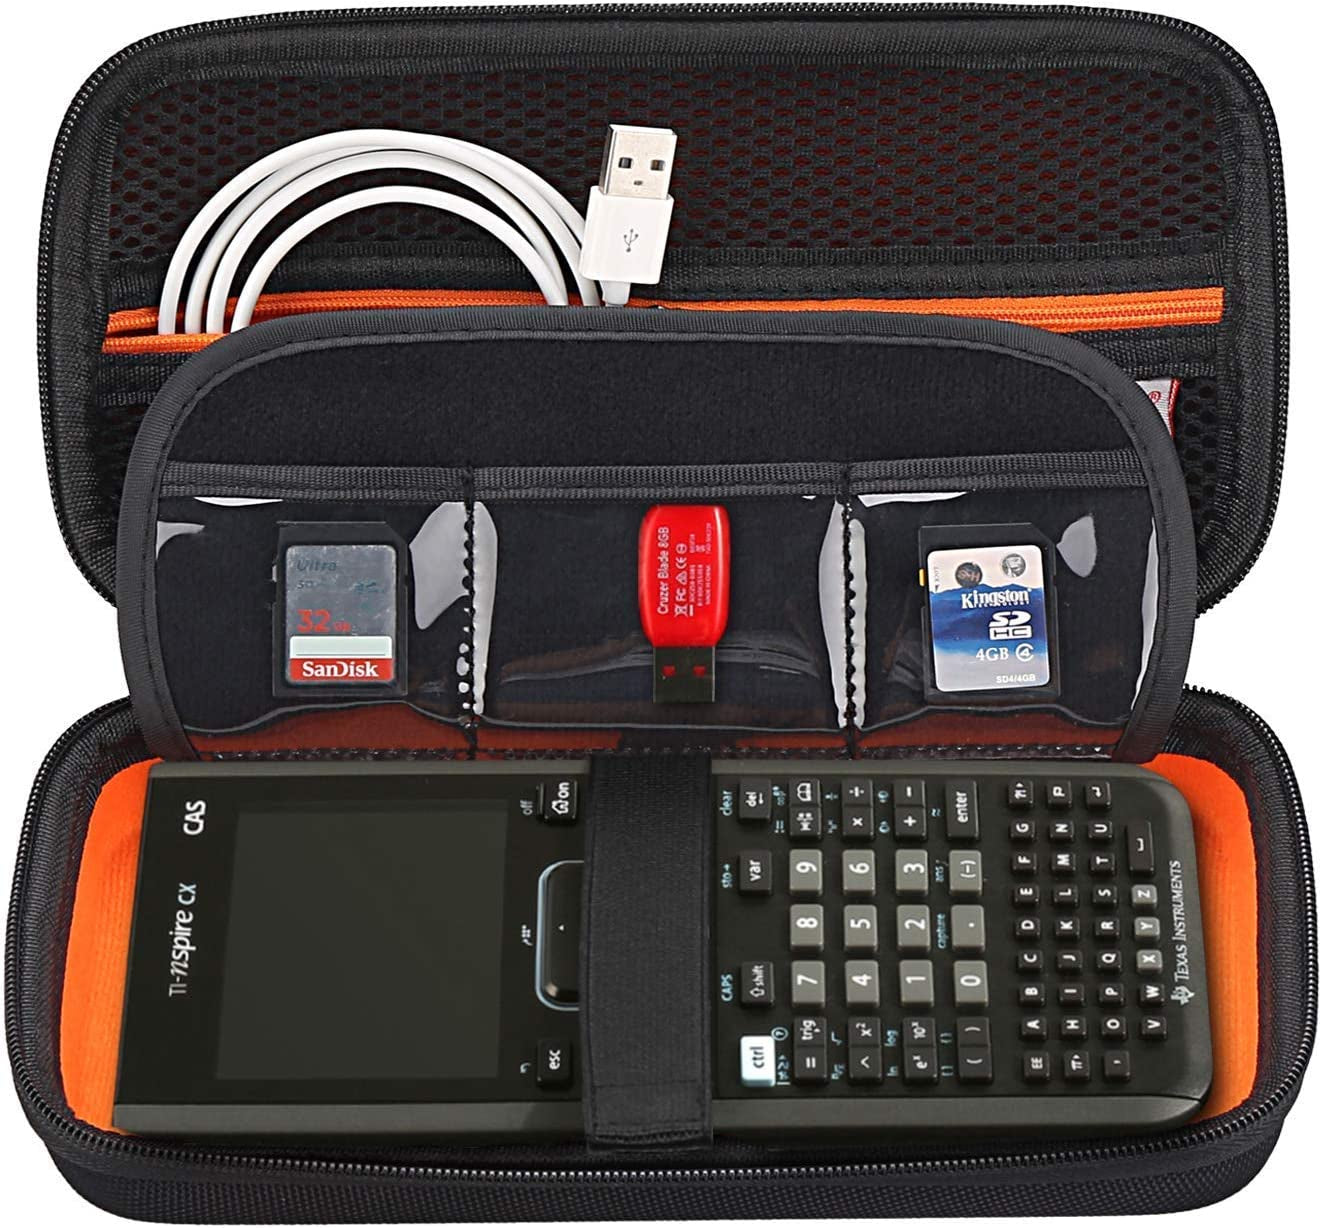 Graphing Calculator Carrying Case Replacement for Texas Instruments Ti-Nspire CX CAS/CX II CAS Color Graphing Calculator and More - Extra Mesh Pocket for USB Cables and Other Accessories, Black